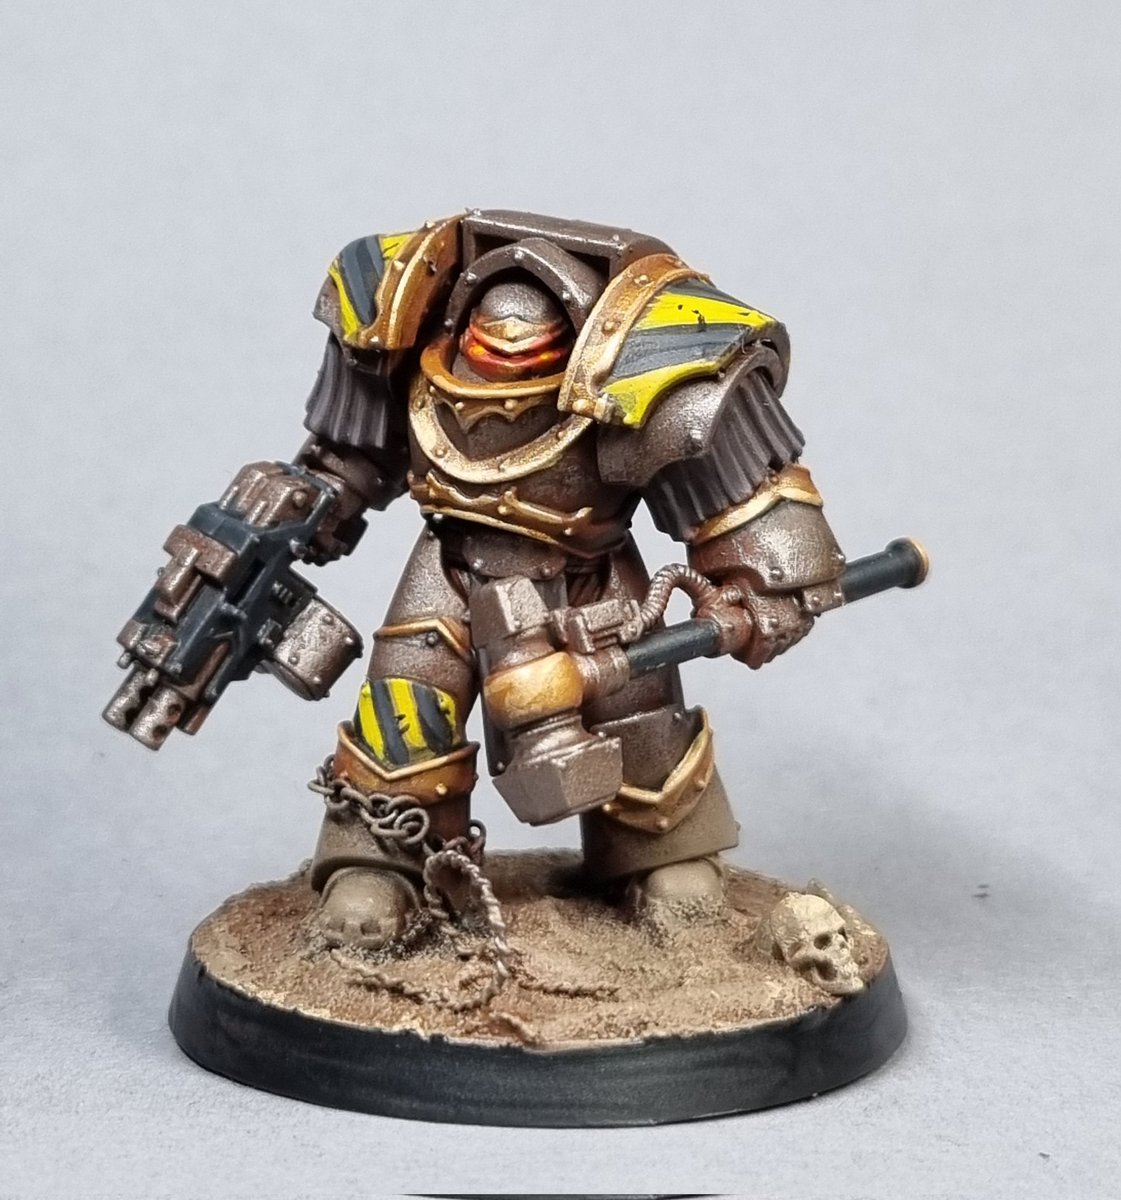 Clear the breach, unspool your razor wire, dig in, keep your head down, and get ready! It's daily Iron Warriors, part 2! 

#WarhammerCommunity
#warmongers
#ironwithin